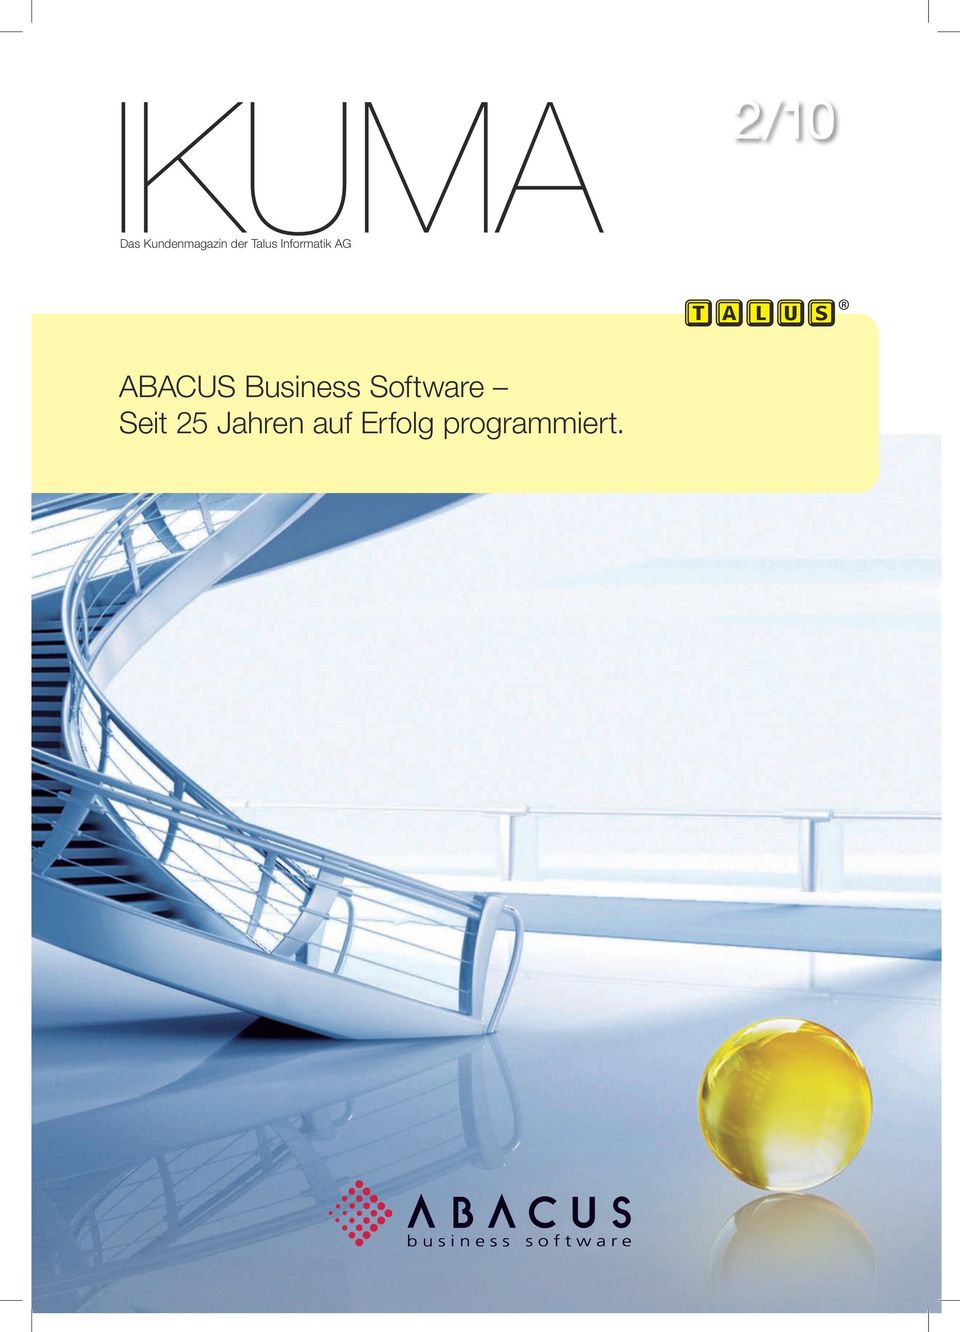 ABACUS Business Software Seit